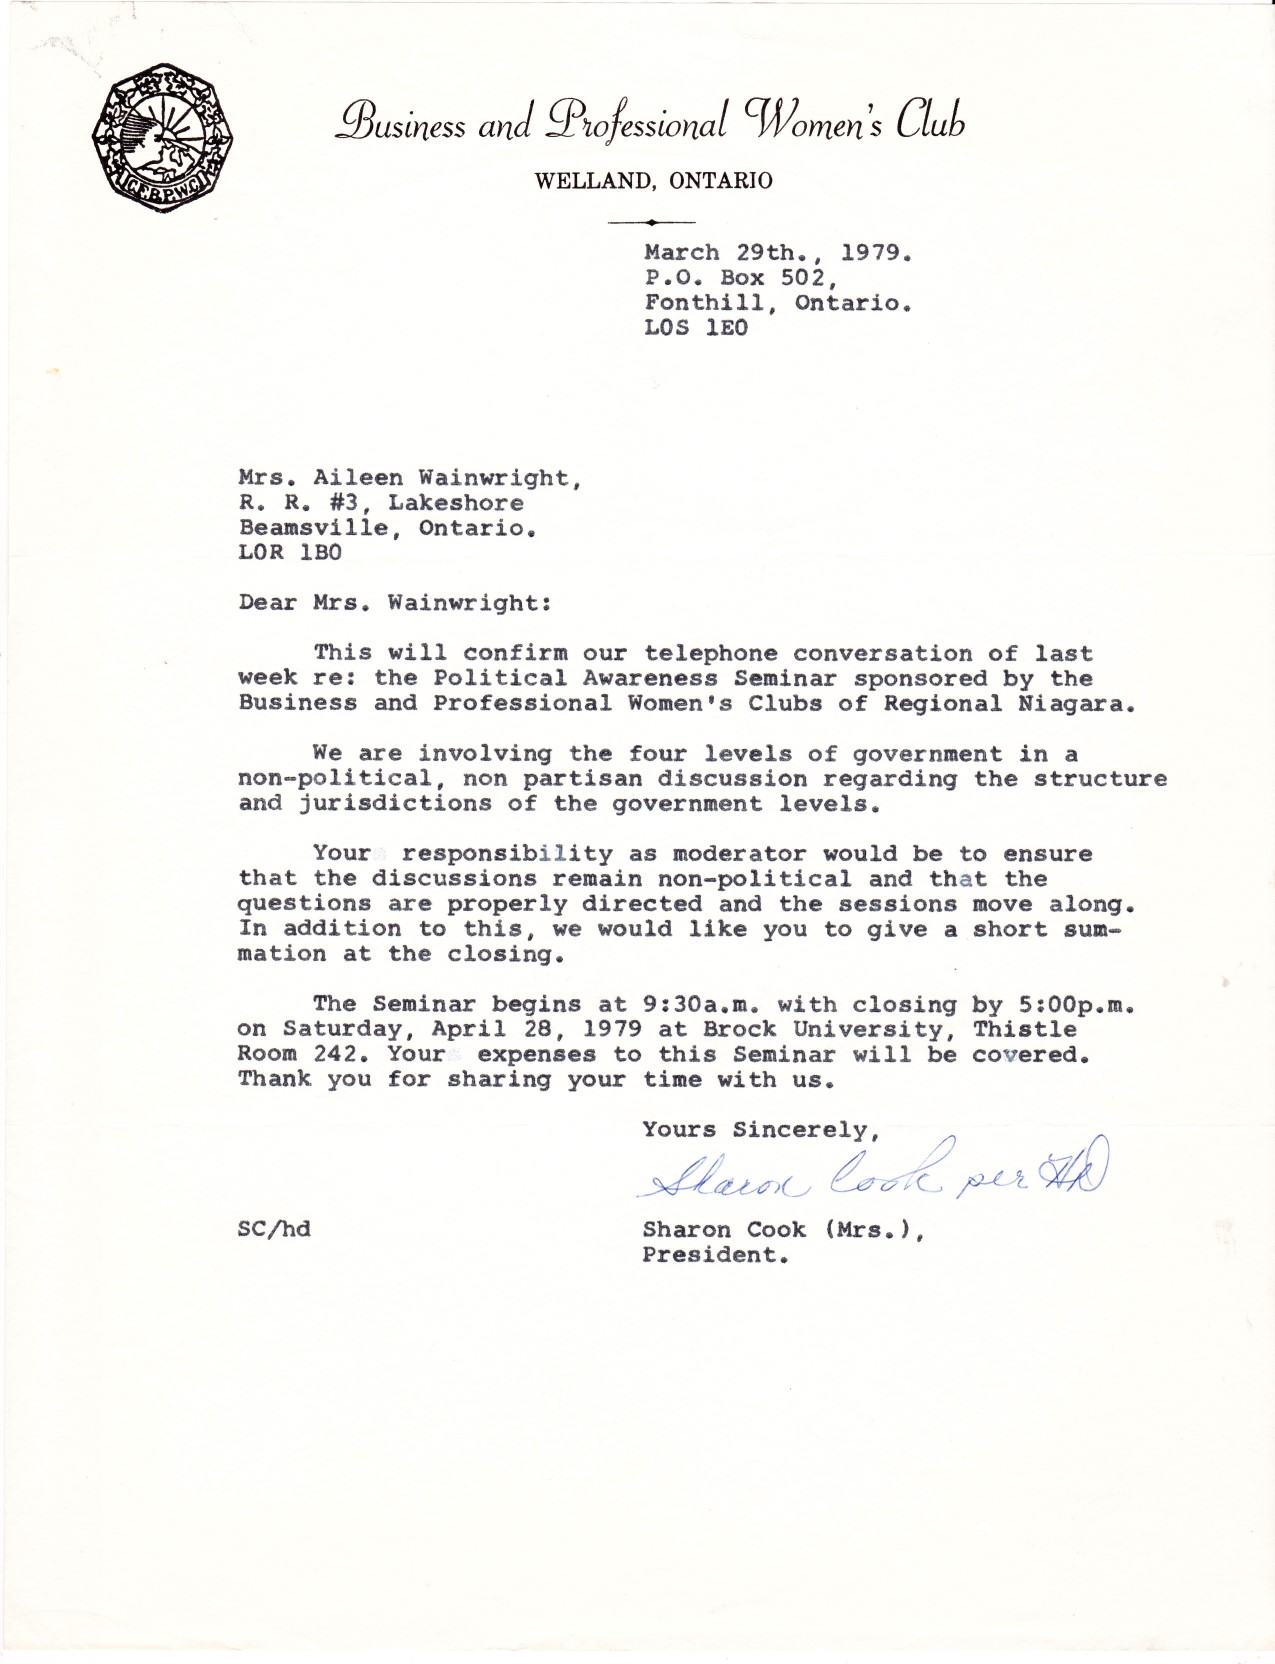 Letter to Aline from Business and Professional Women's Club - Moderator April 28, 1979- date March 29, 1979